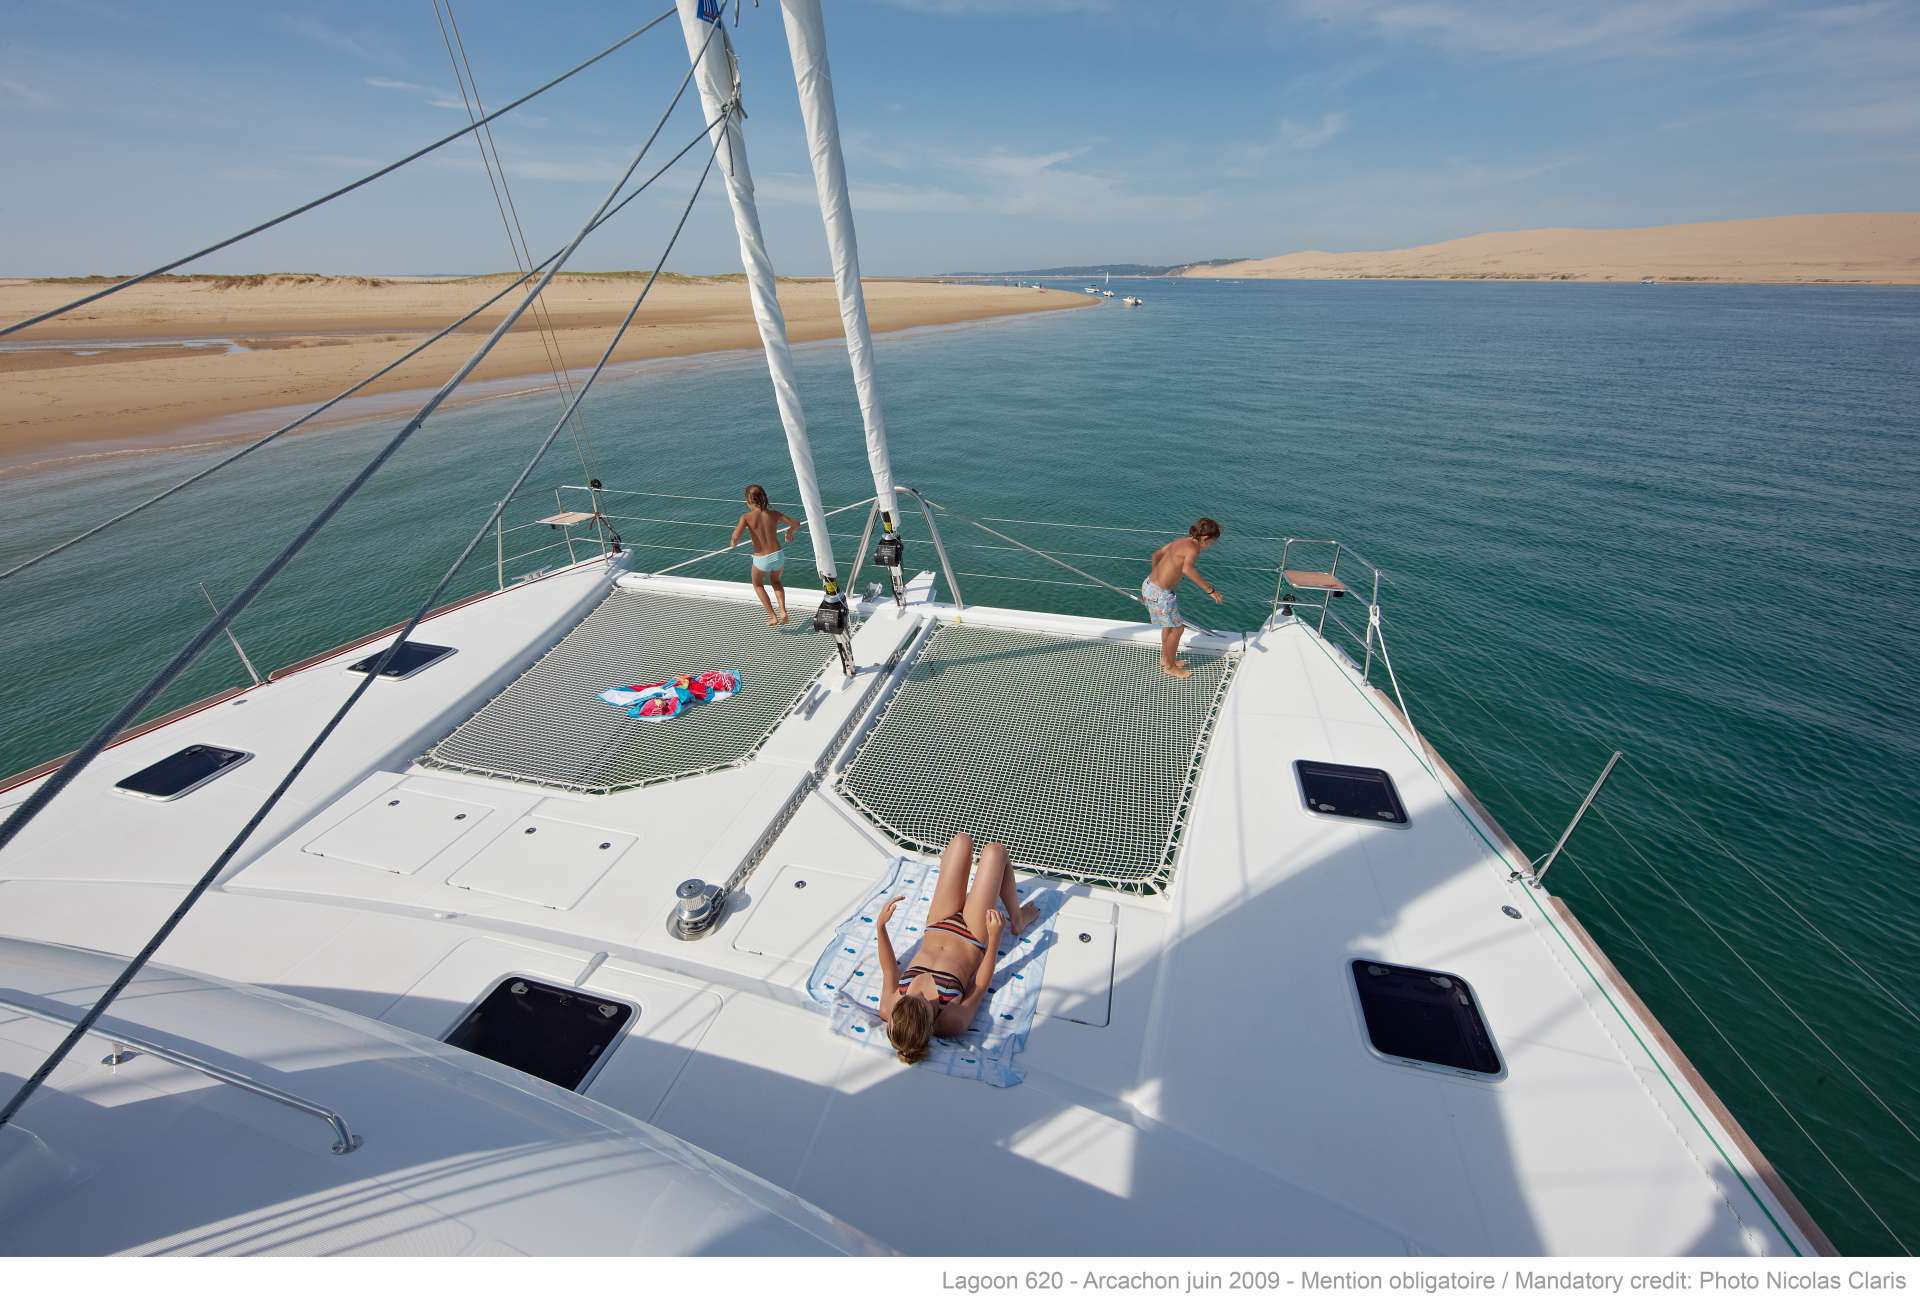 FIREFLY Yacht Charter - Trampolines (sistership)